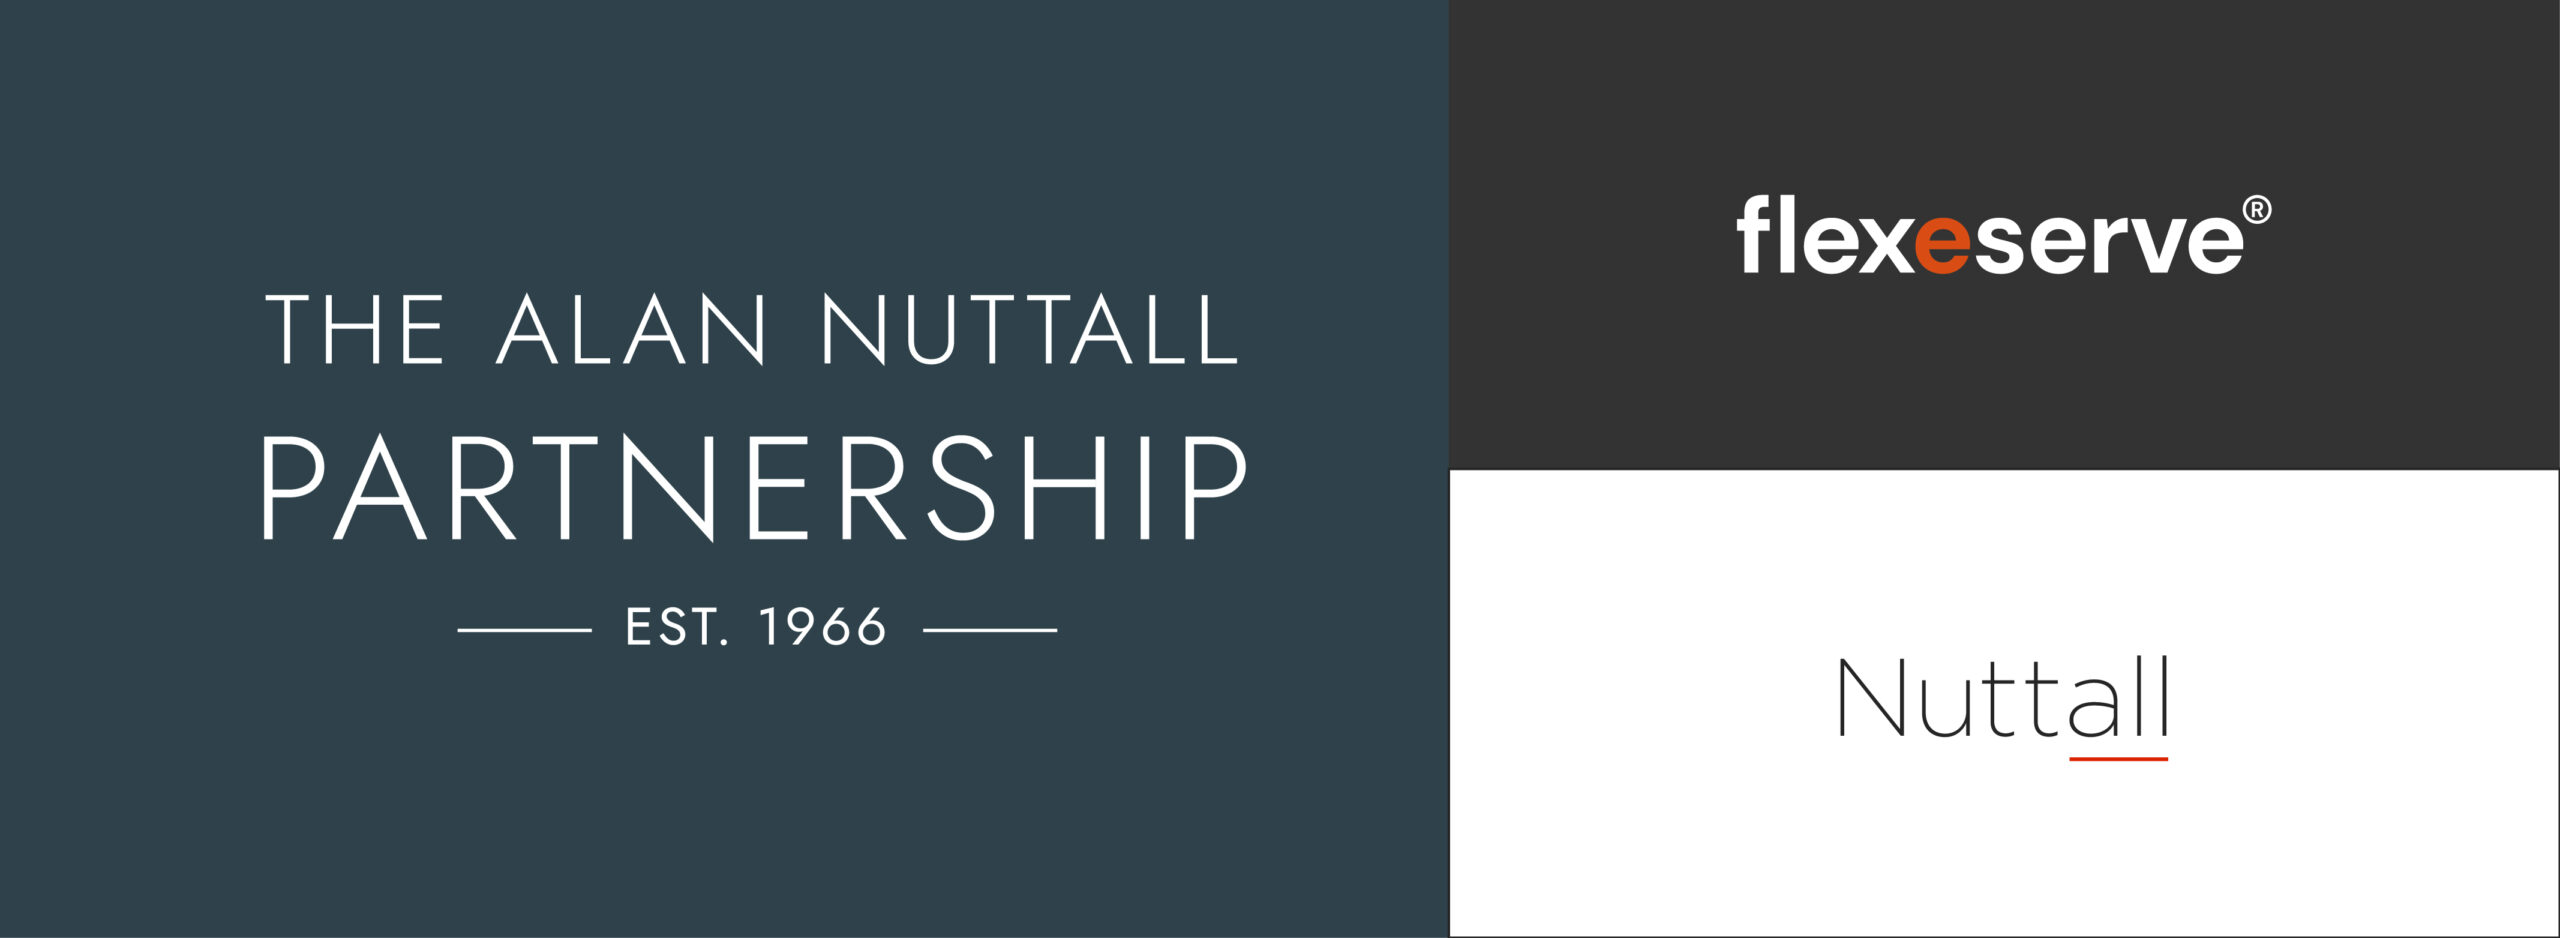 Logos lockup of The Alan Nuttall Partnership and its two brands, Flexeserve – industry leaders in hot-holding and food-to-go, and Nuttall – specialists in retail environments